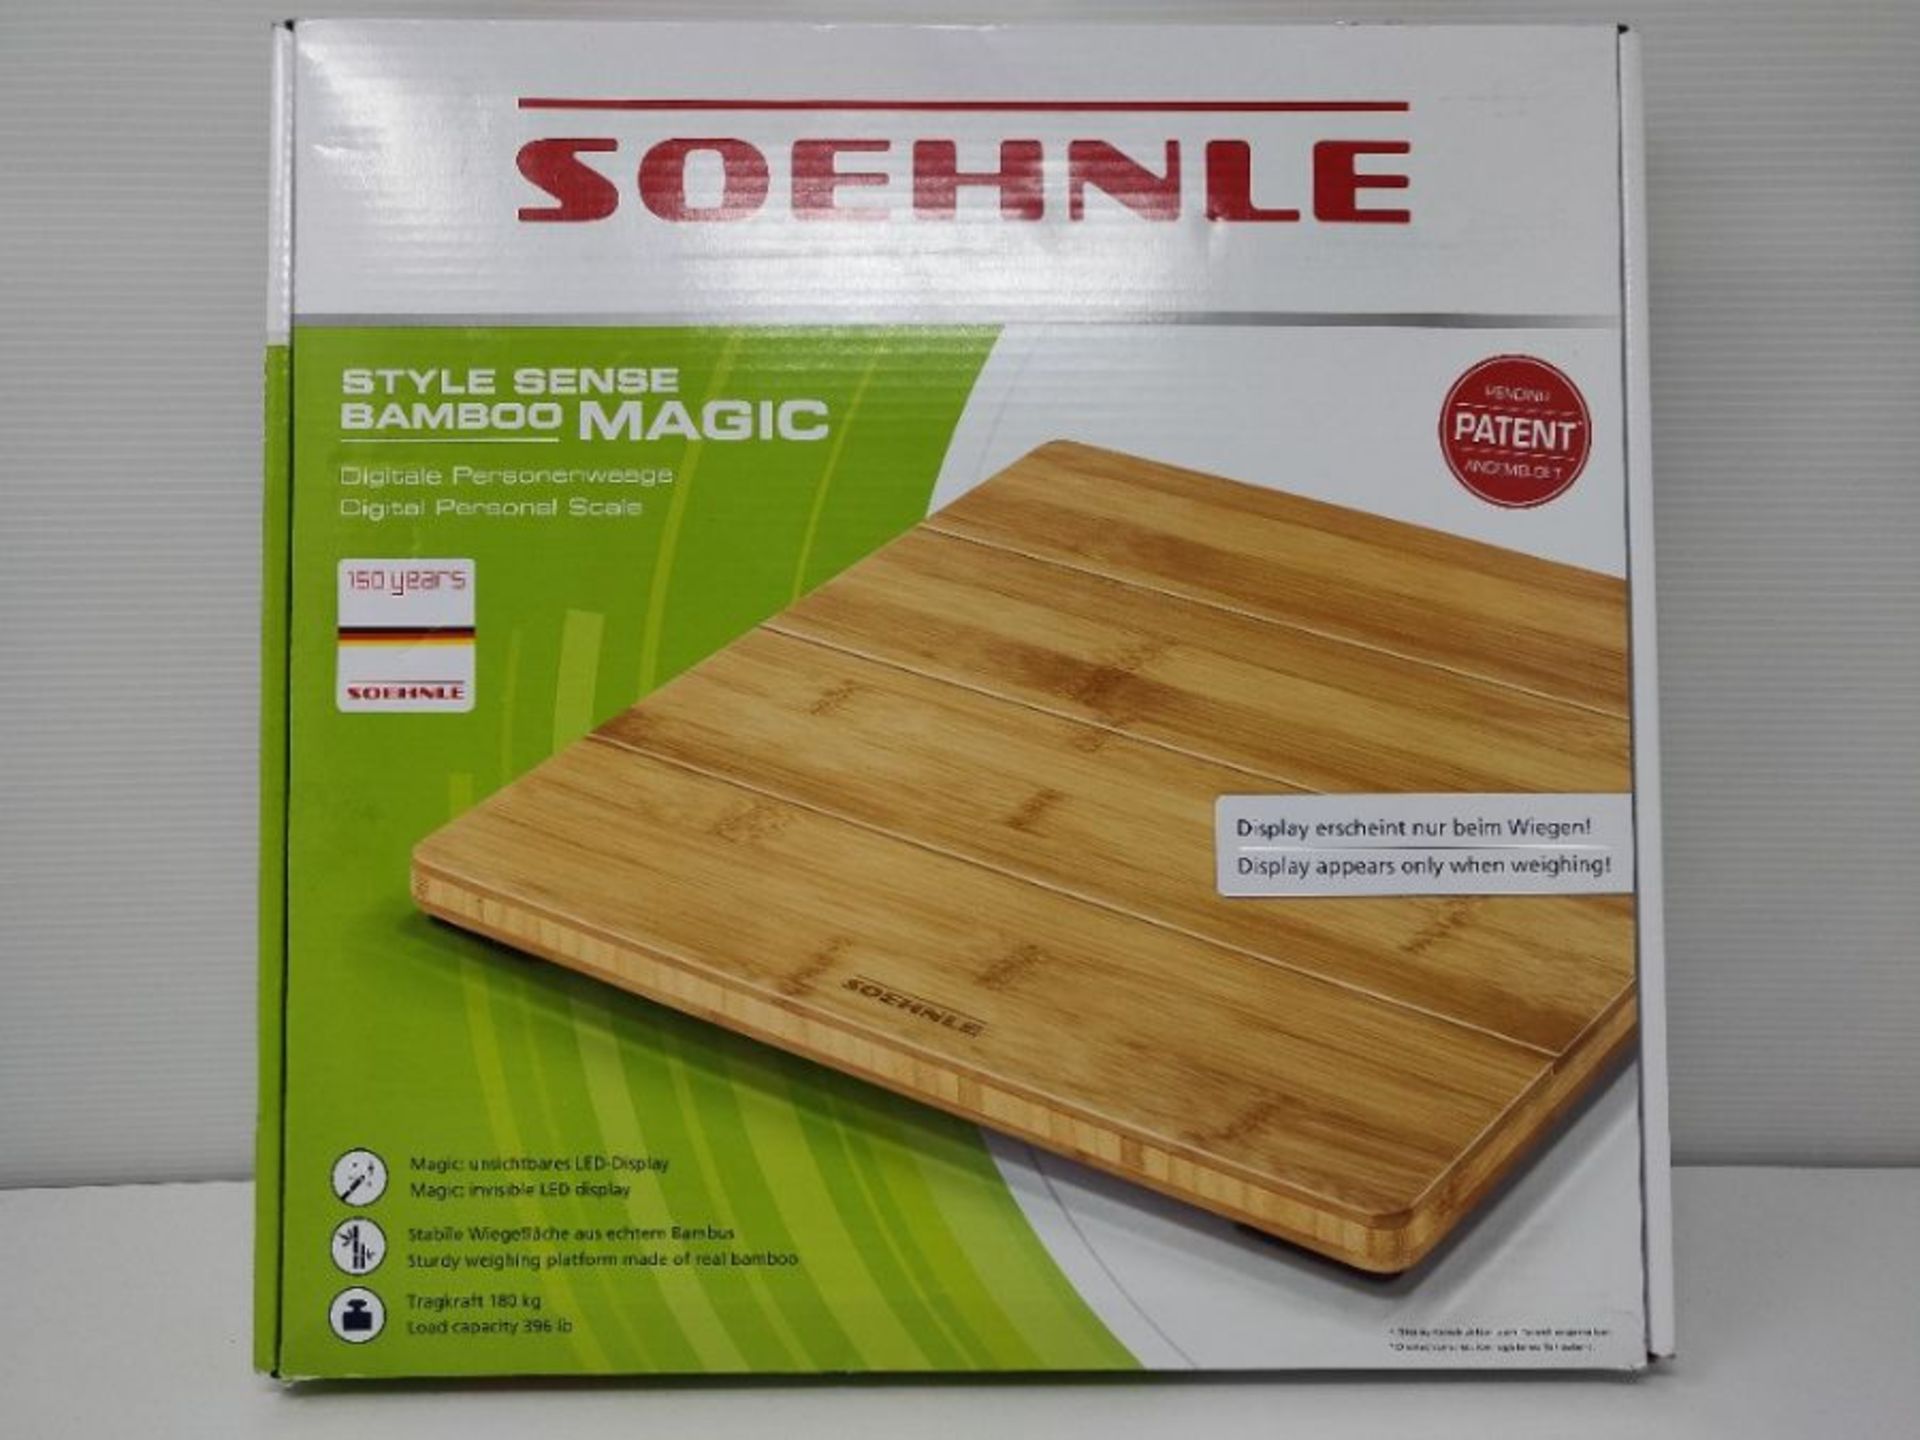 Soehnle Style Sense Bamboo Magic, Digital Bathroom Scales, Weight up to 180 kg in 100 - Image 2 of 2